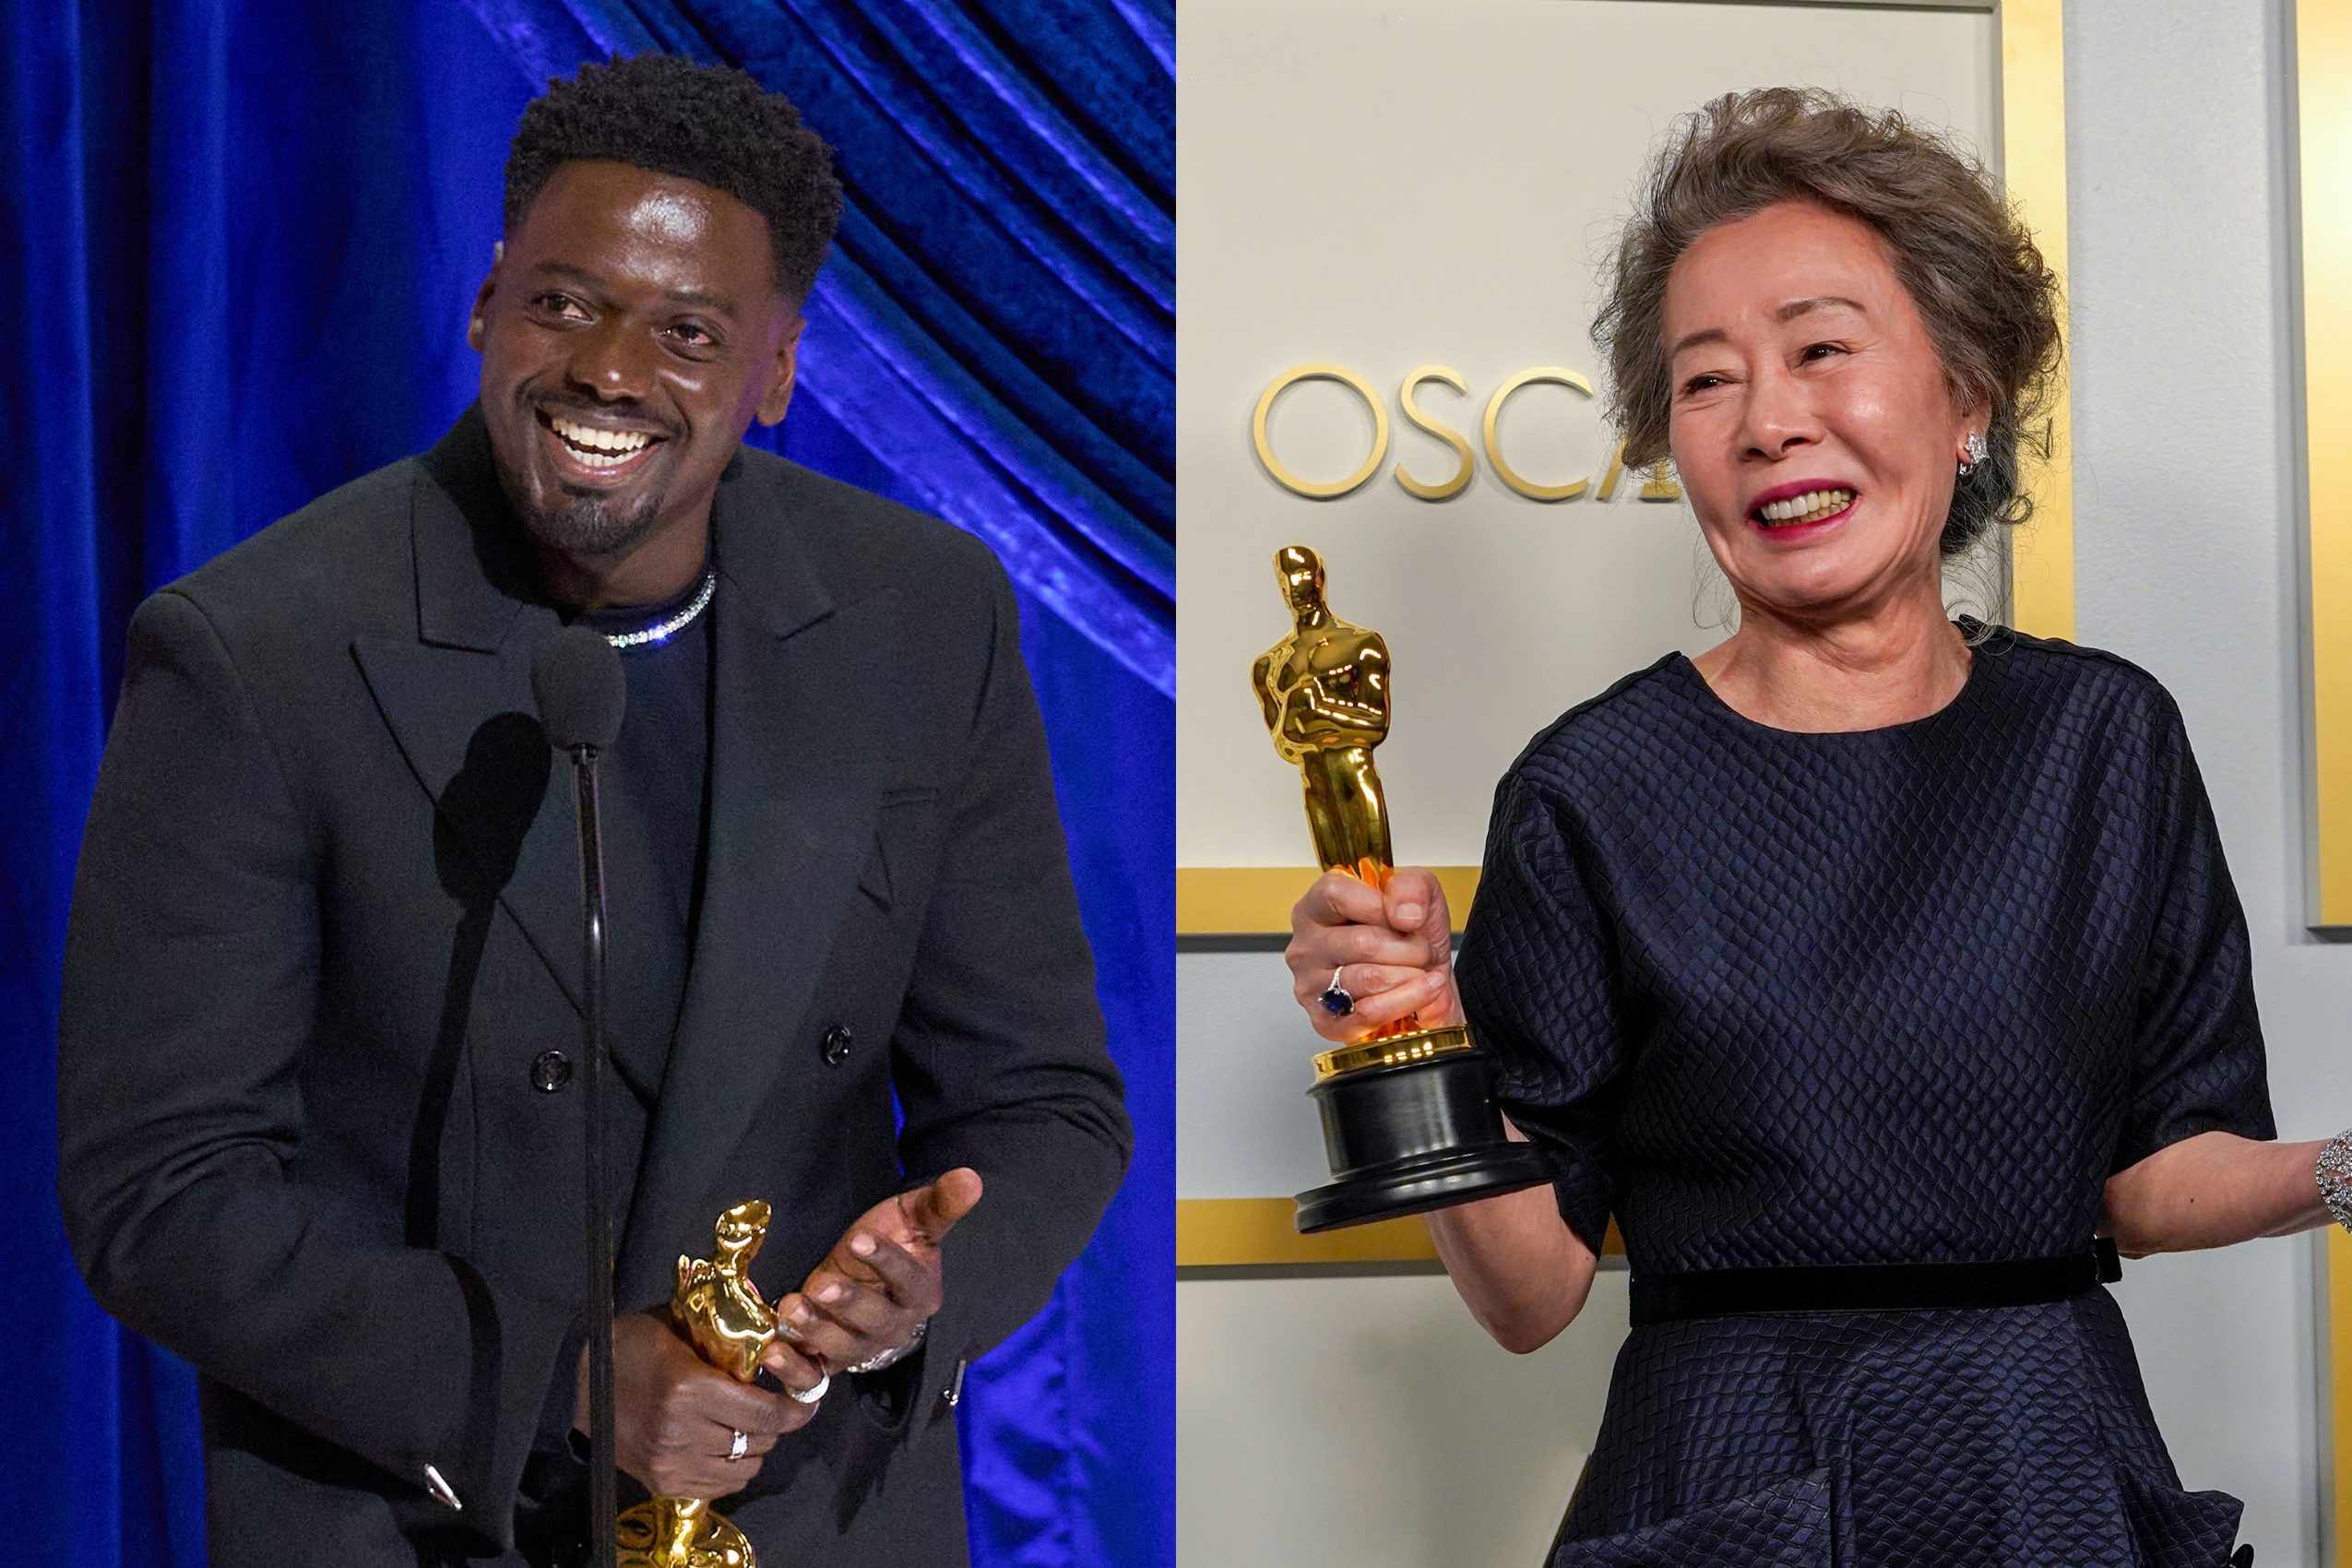 Oscars 2021: All The Winners and Losers from the 93rd Academy